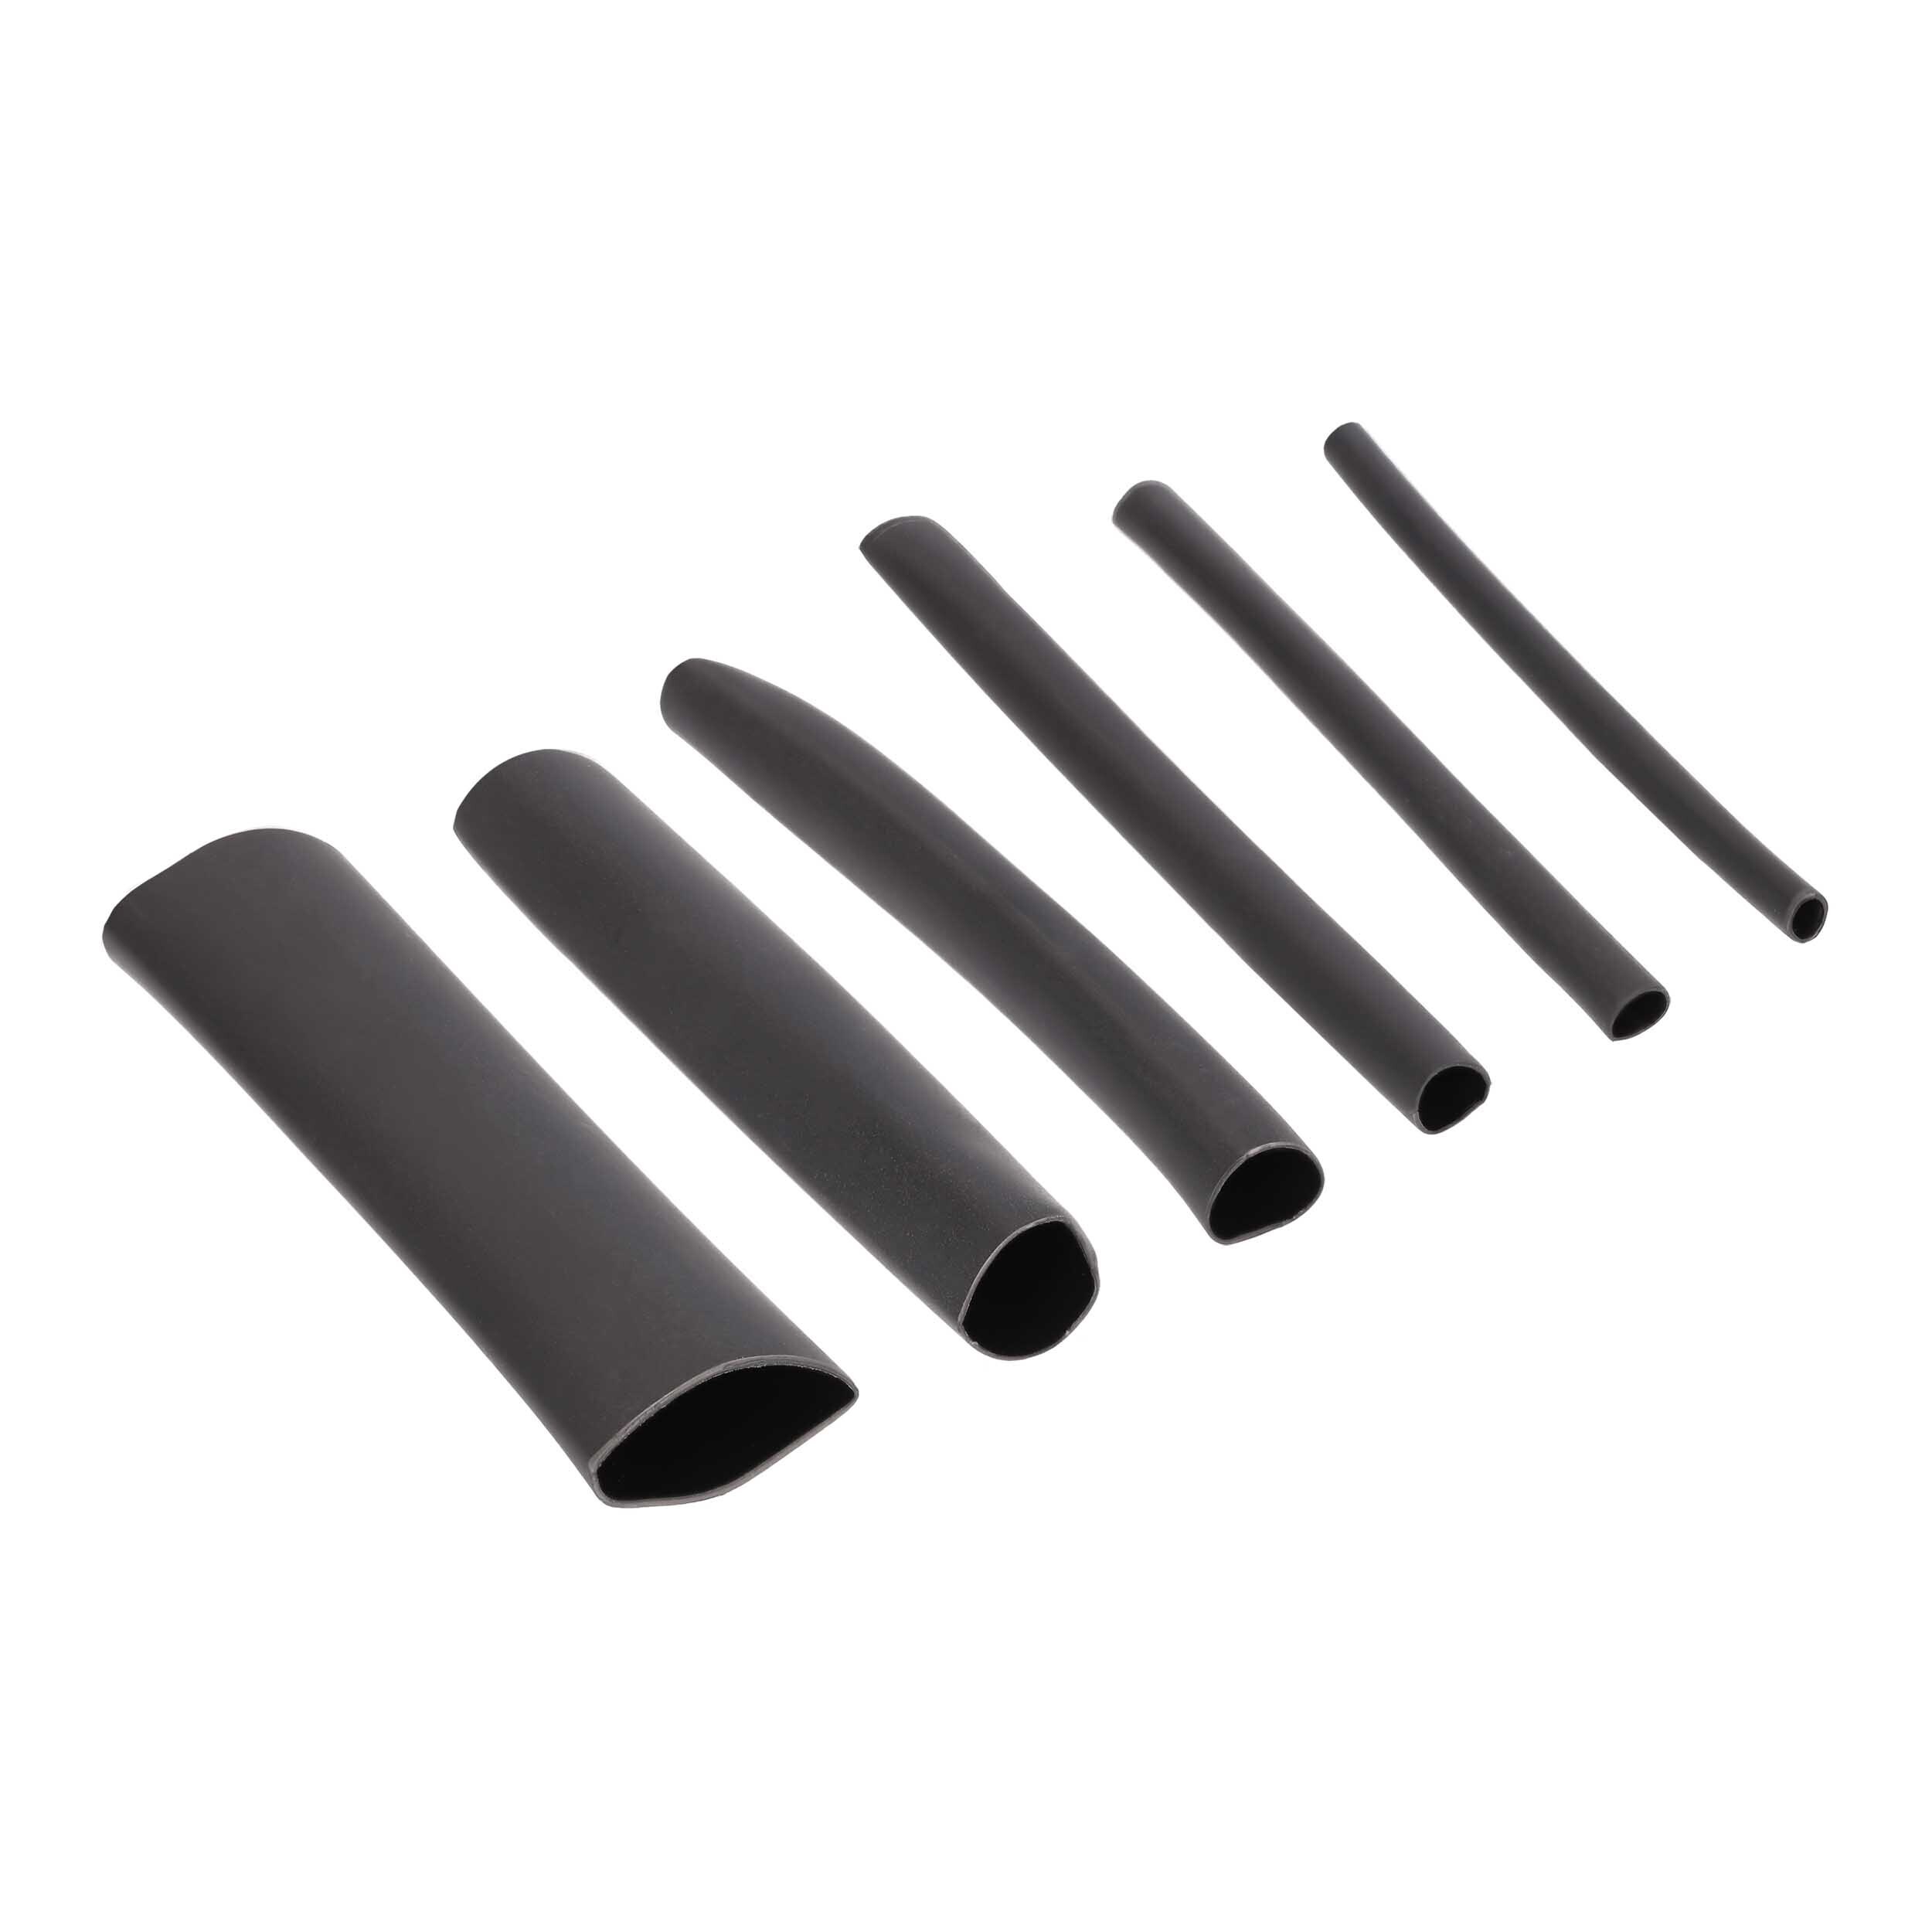 62 Pc Dual Wall Heat Shrink Tubing Kit - 4in Assorted 3:1 Black